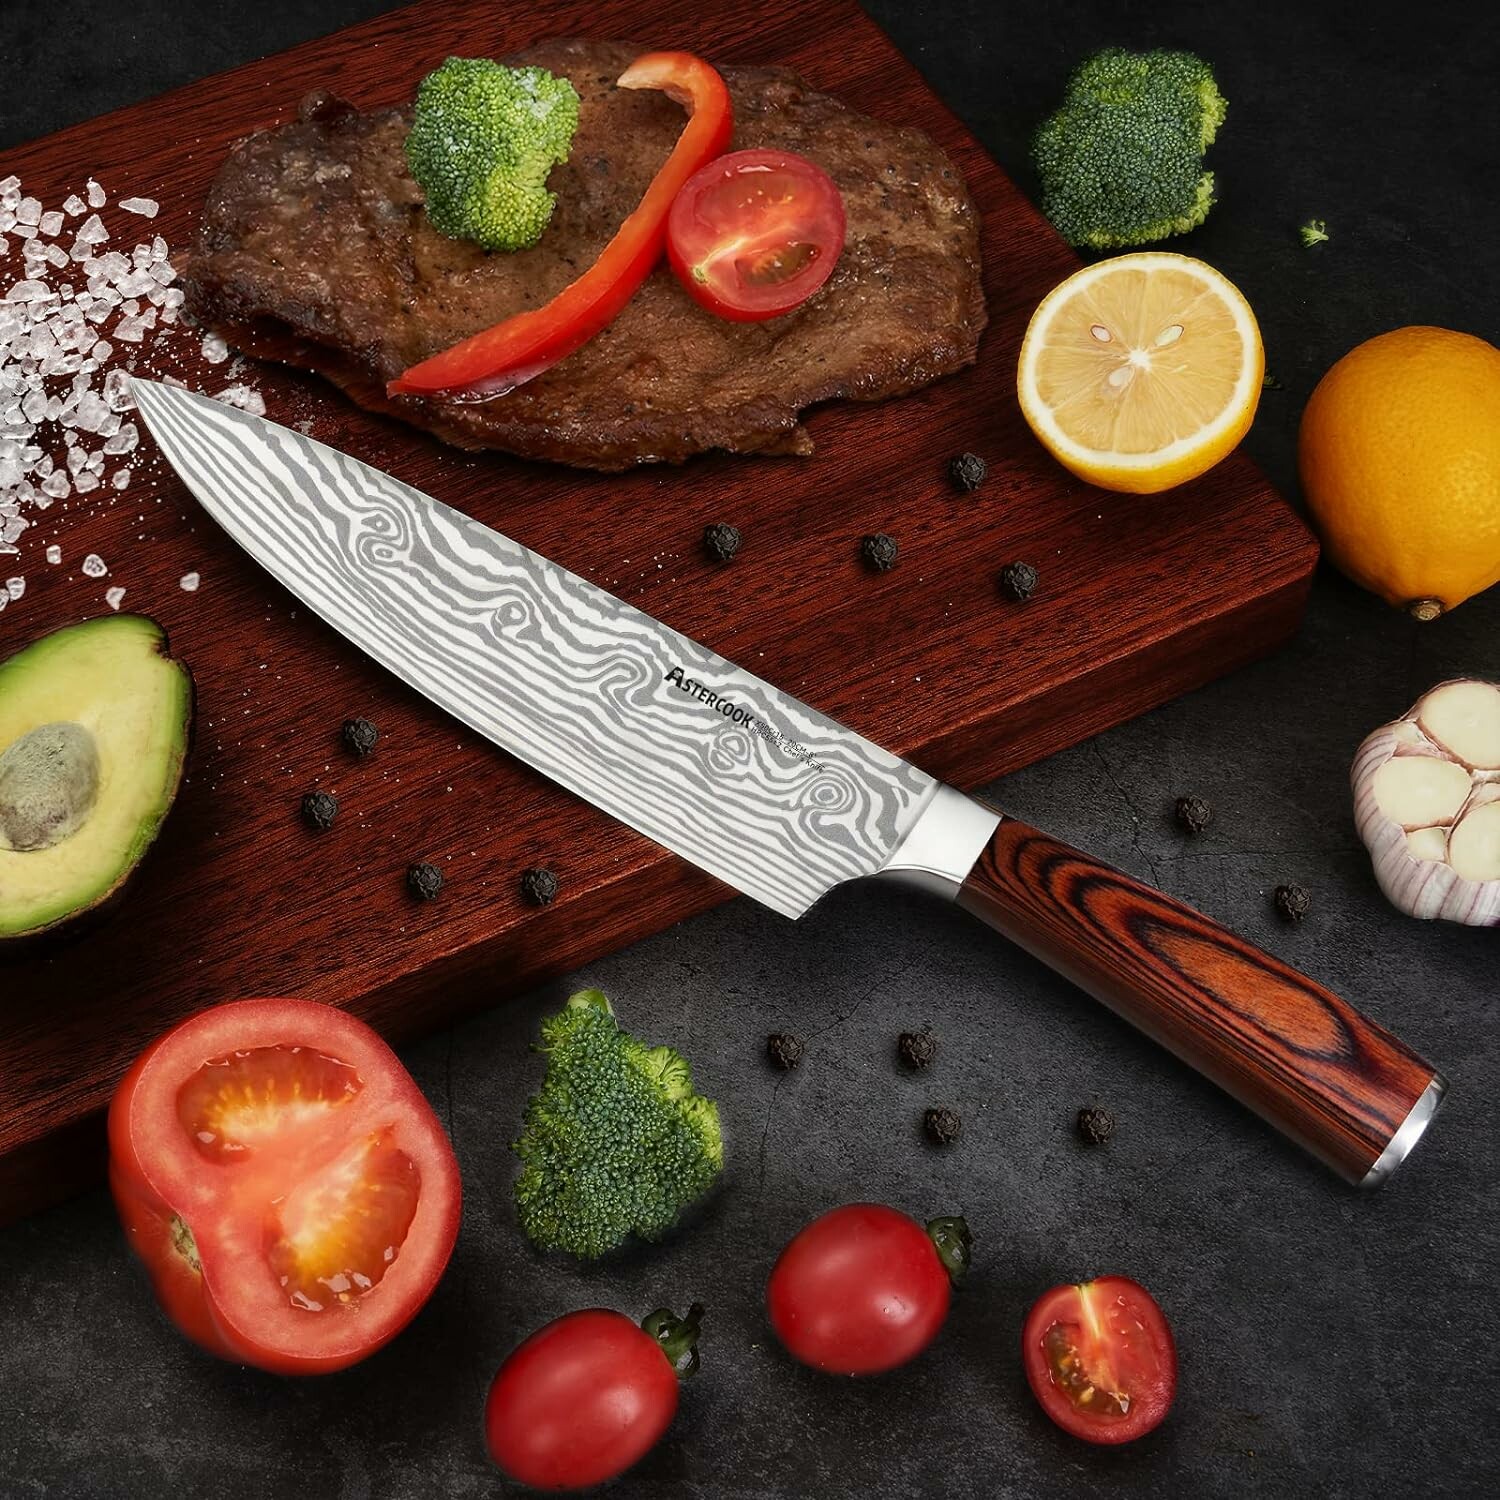 Astercook Chef Knife, Pro 8 Inch Kitchen Knife, German High Carbon